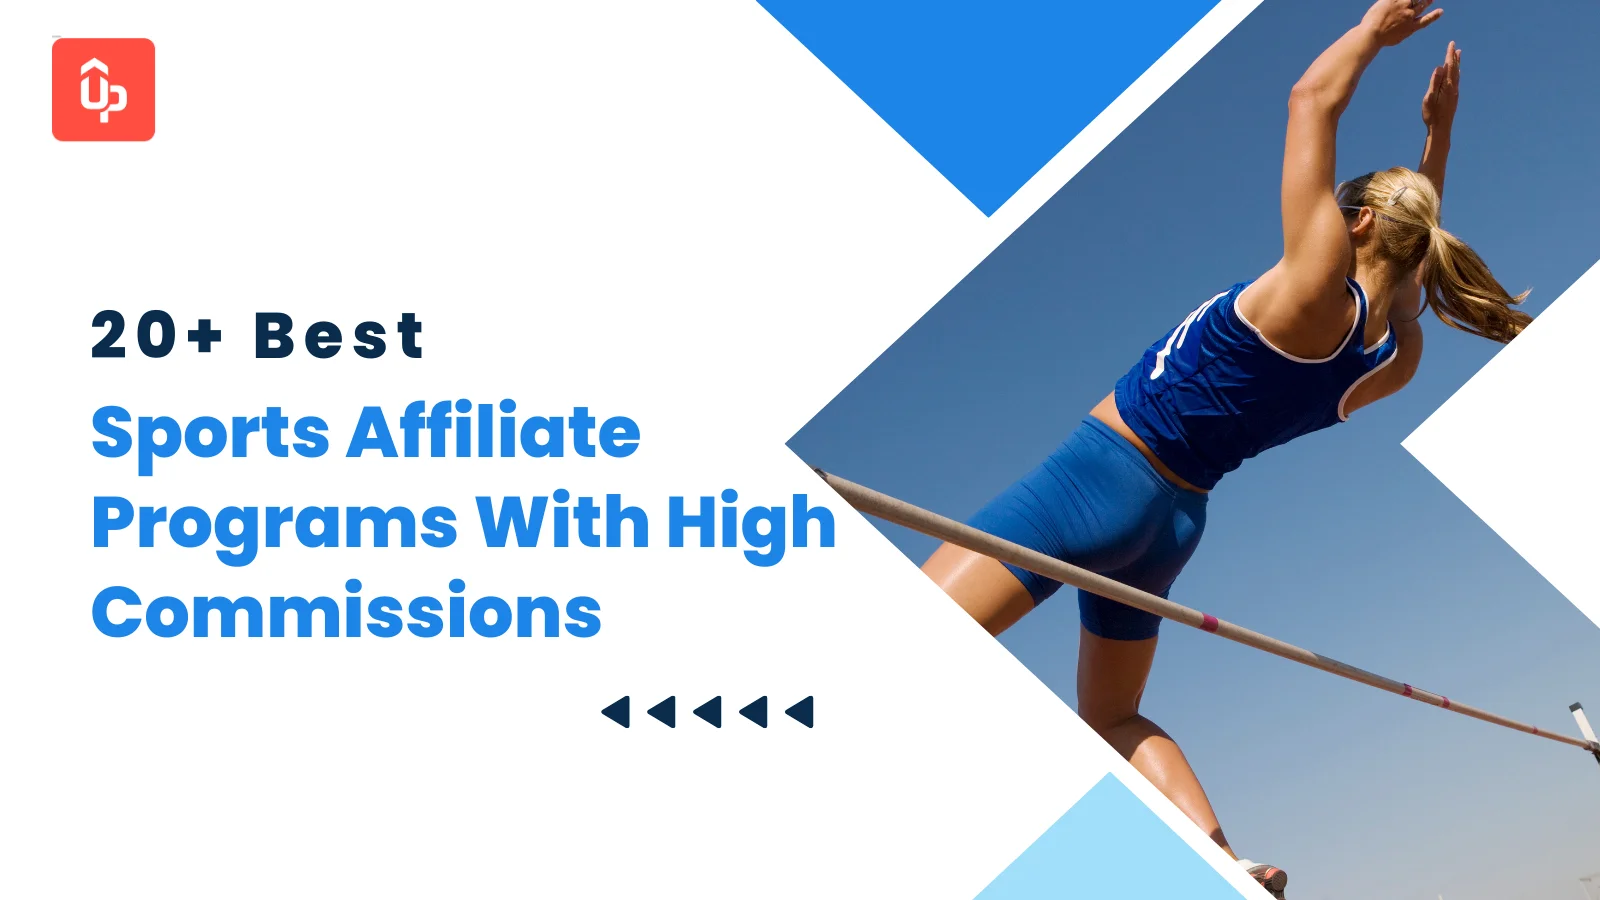 20+ Best Sports Affiliate Programs With High Commissions in 2023